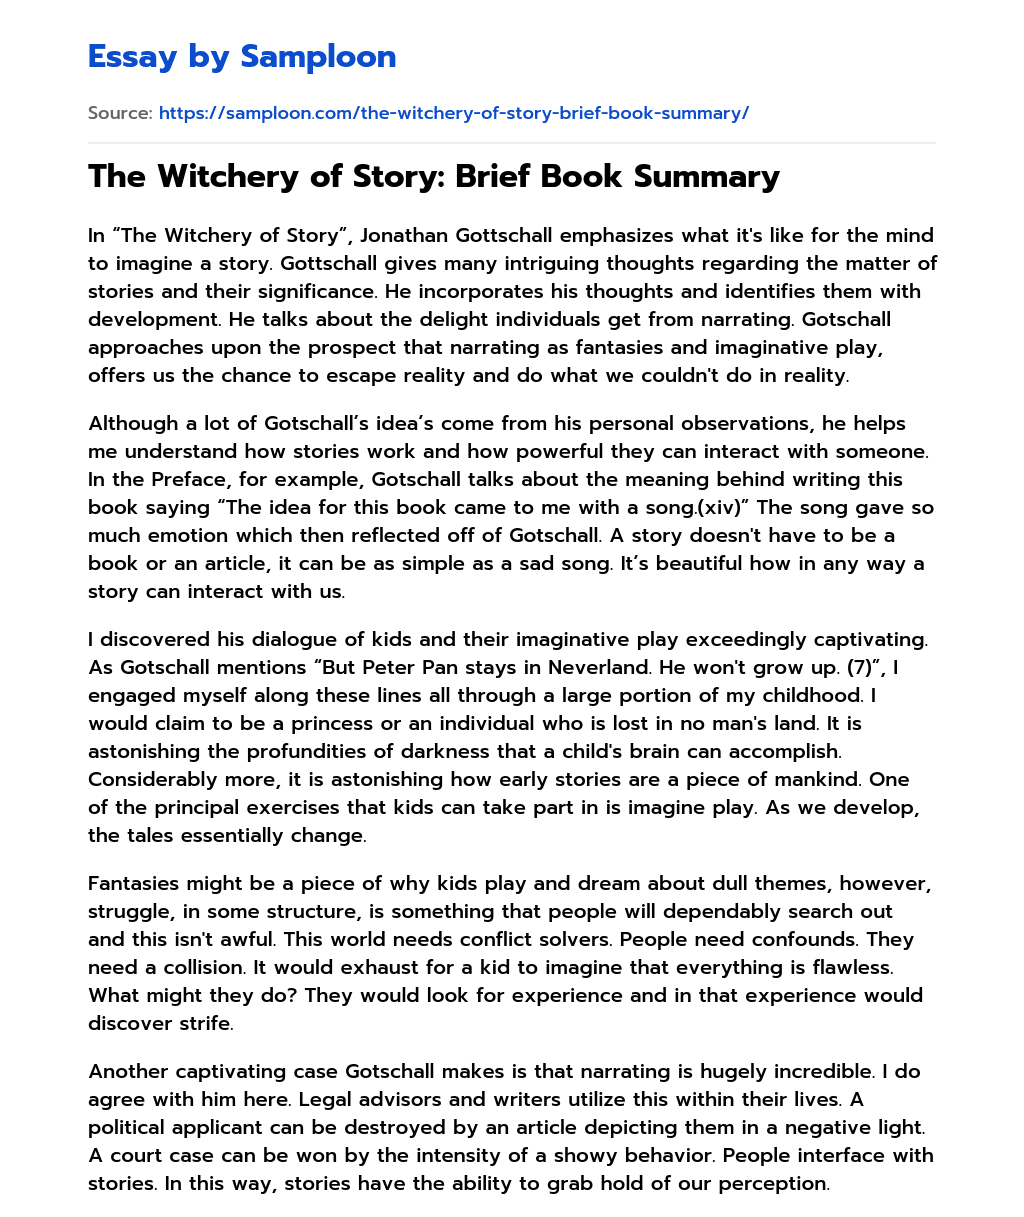 The Witchery of Story: Brief Book Summary essay